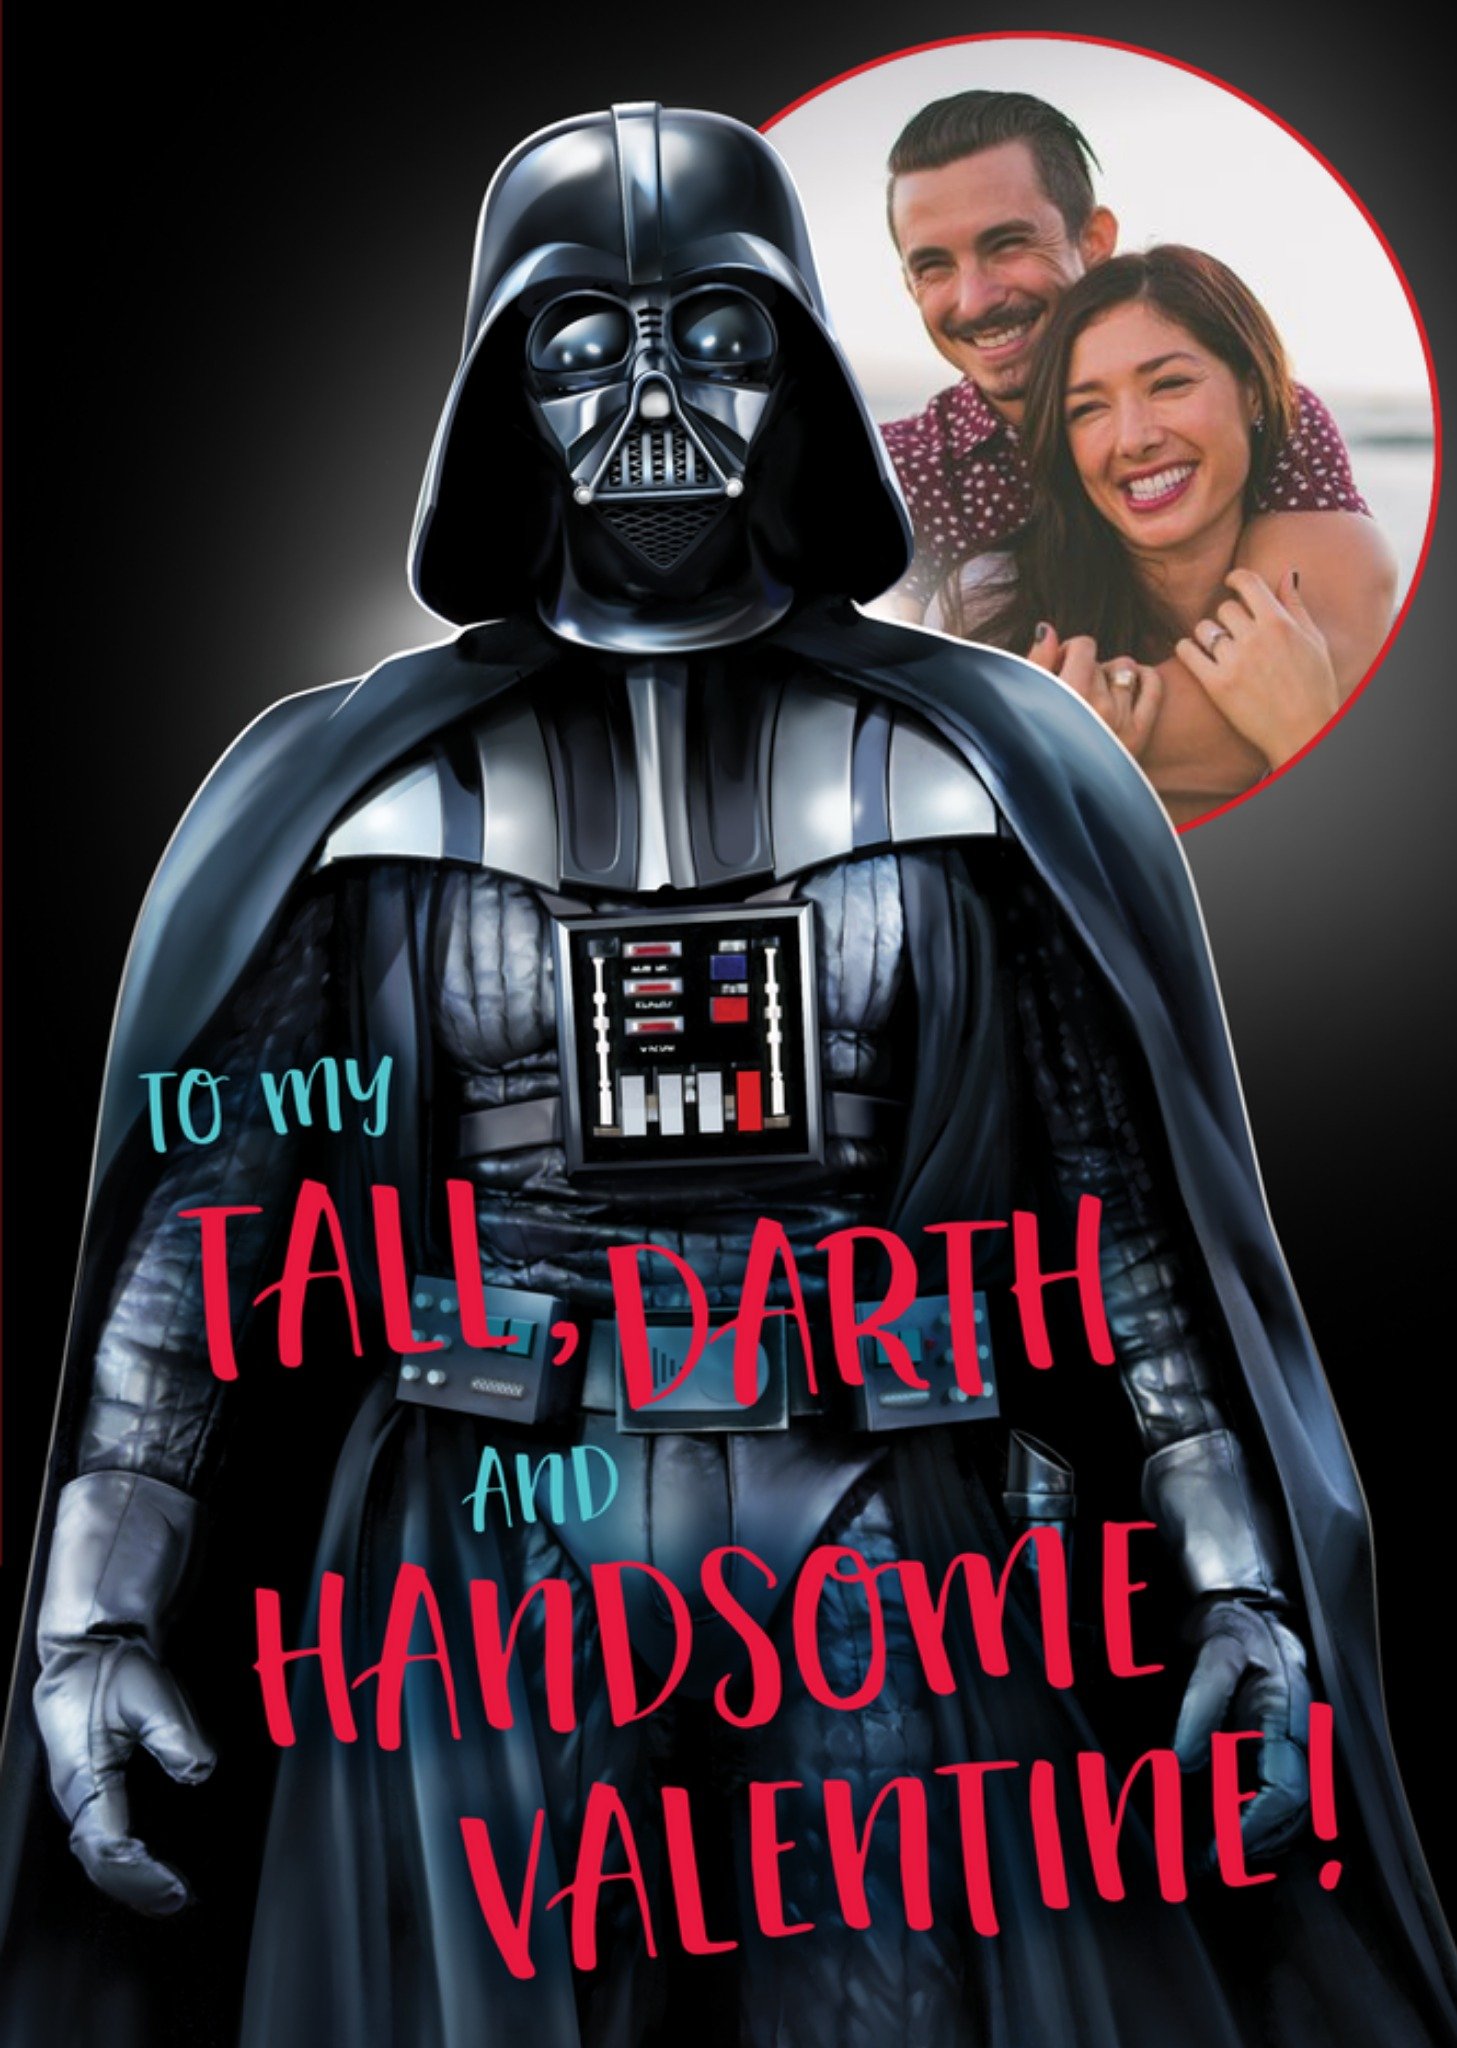 Disney Star Wars To My Tall, Darth, And Handsome Valentines Day Photo Card Ecard